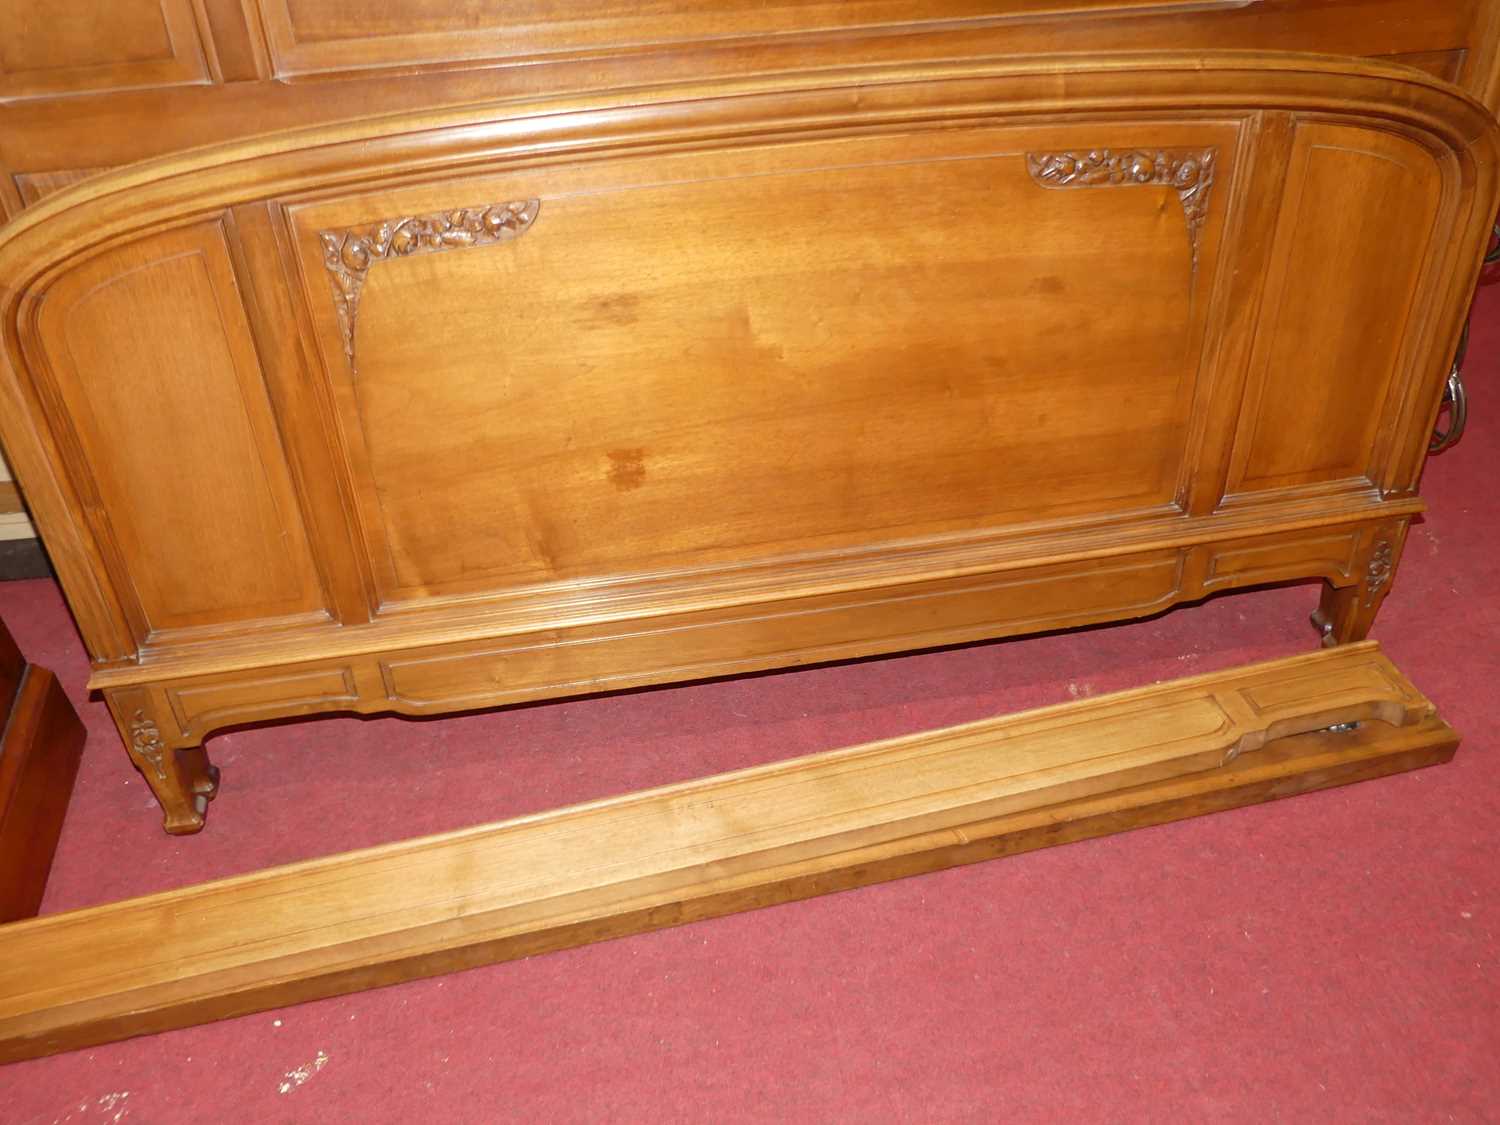 A circa 1900 Vienna secessionist walnut double bedstead, the recessed panelled head and footboard - Image 2 of 8